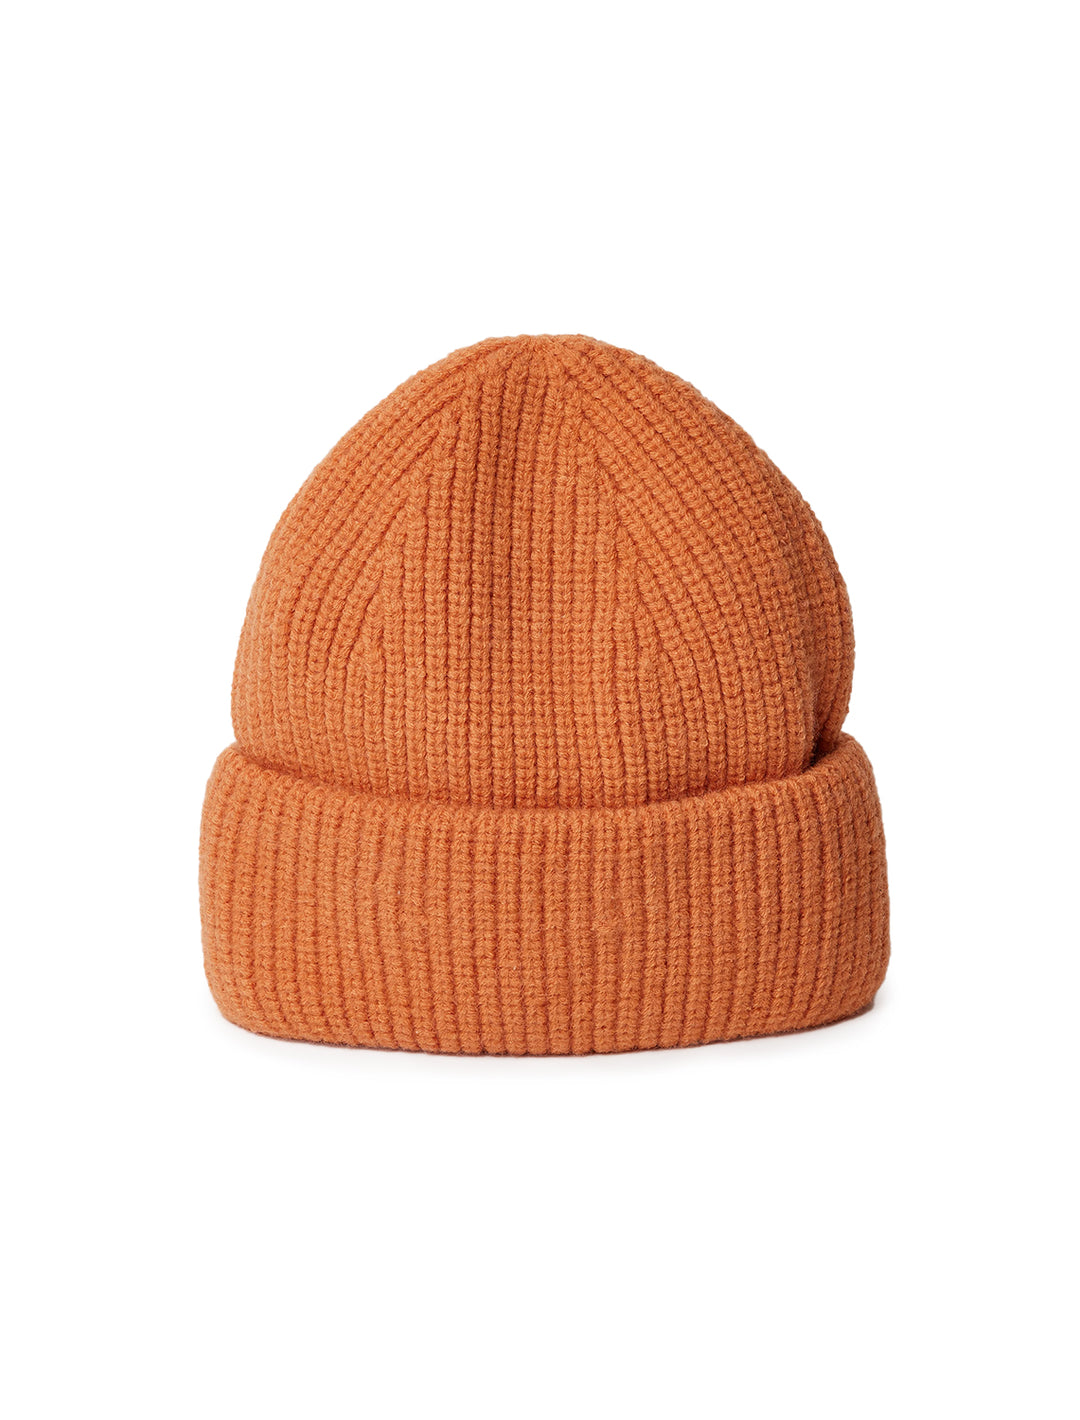 Front view of Hat Attack's Major Beanie in Orange.